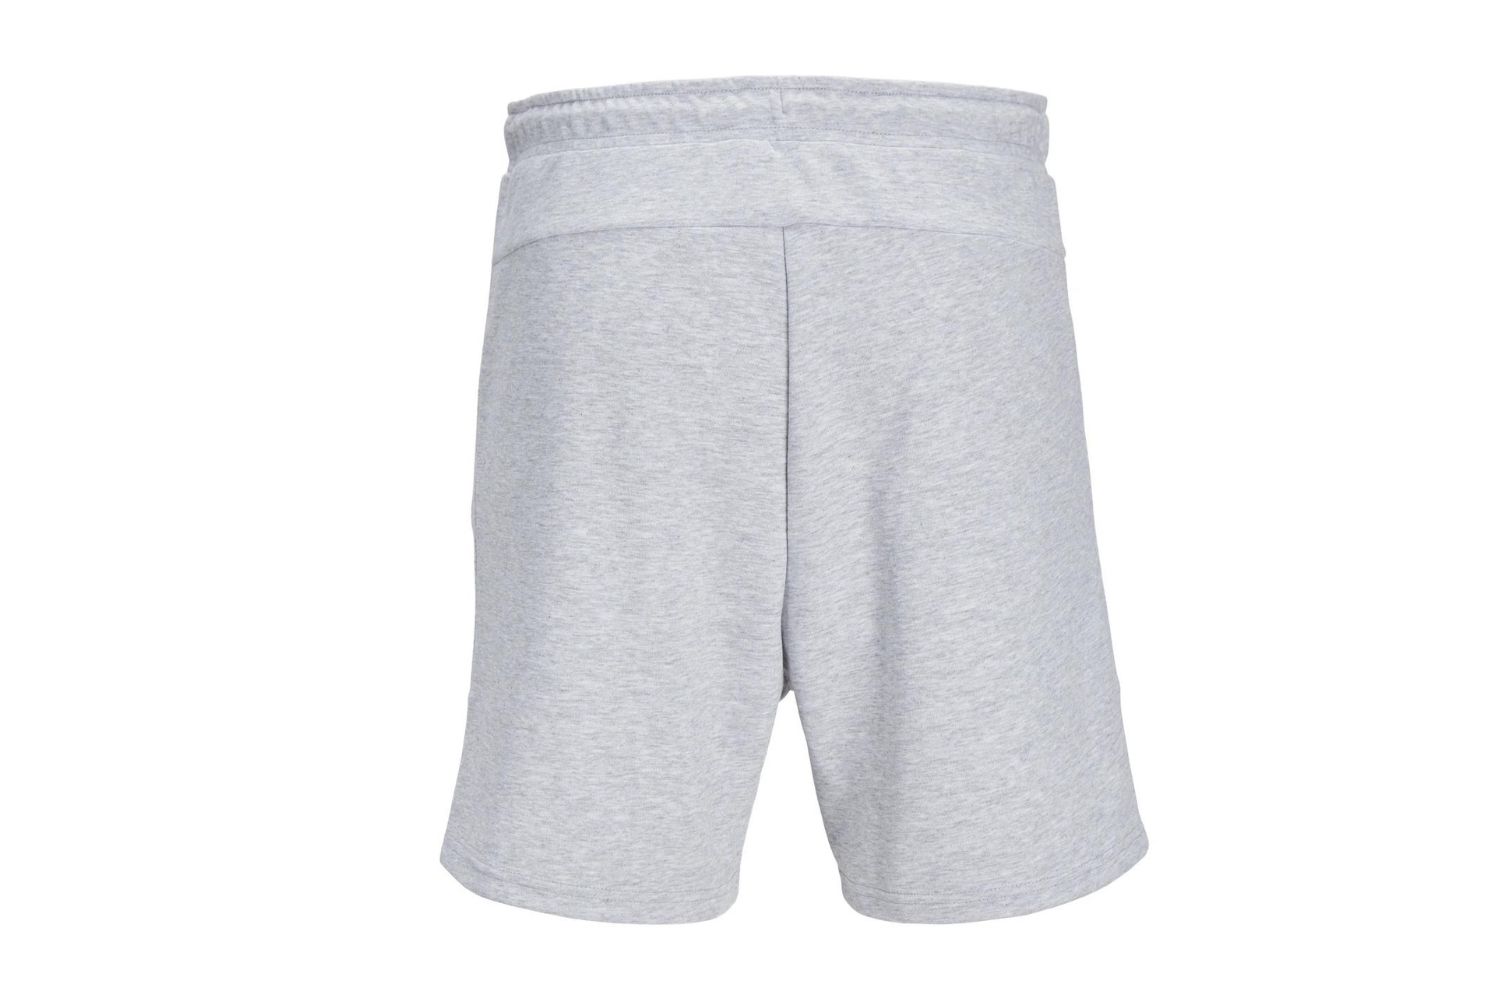 11-surprising-facts-about-sweat-shorts